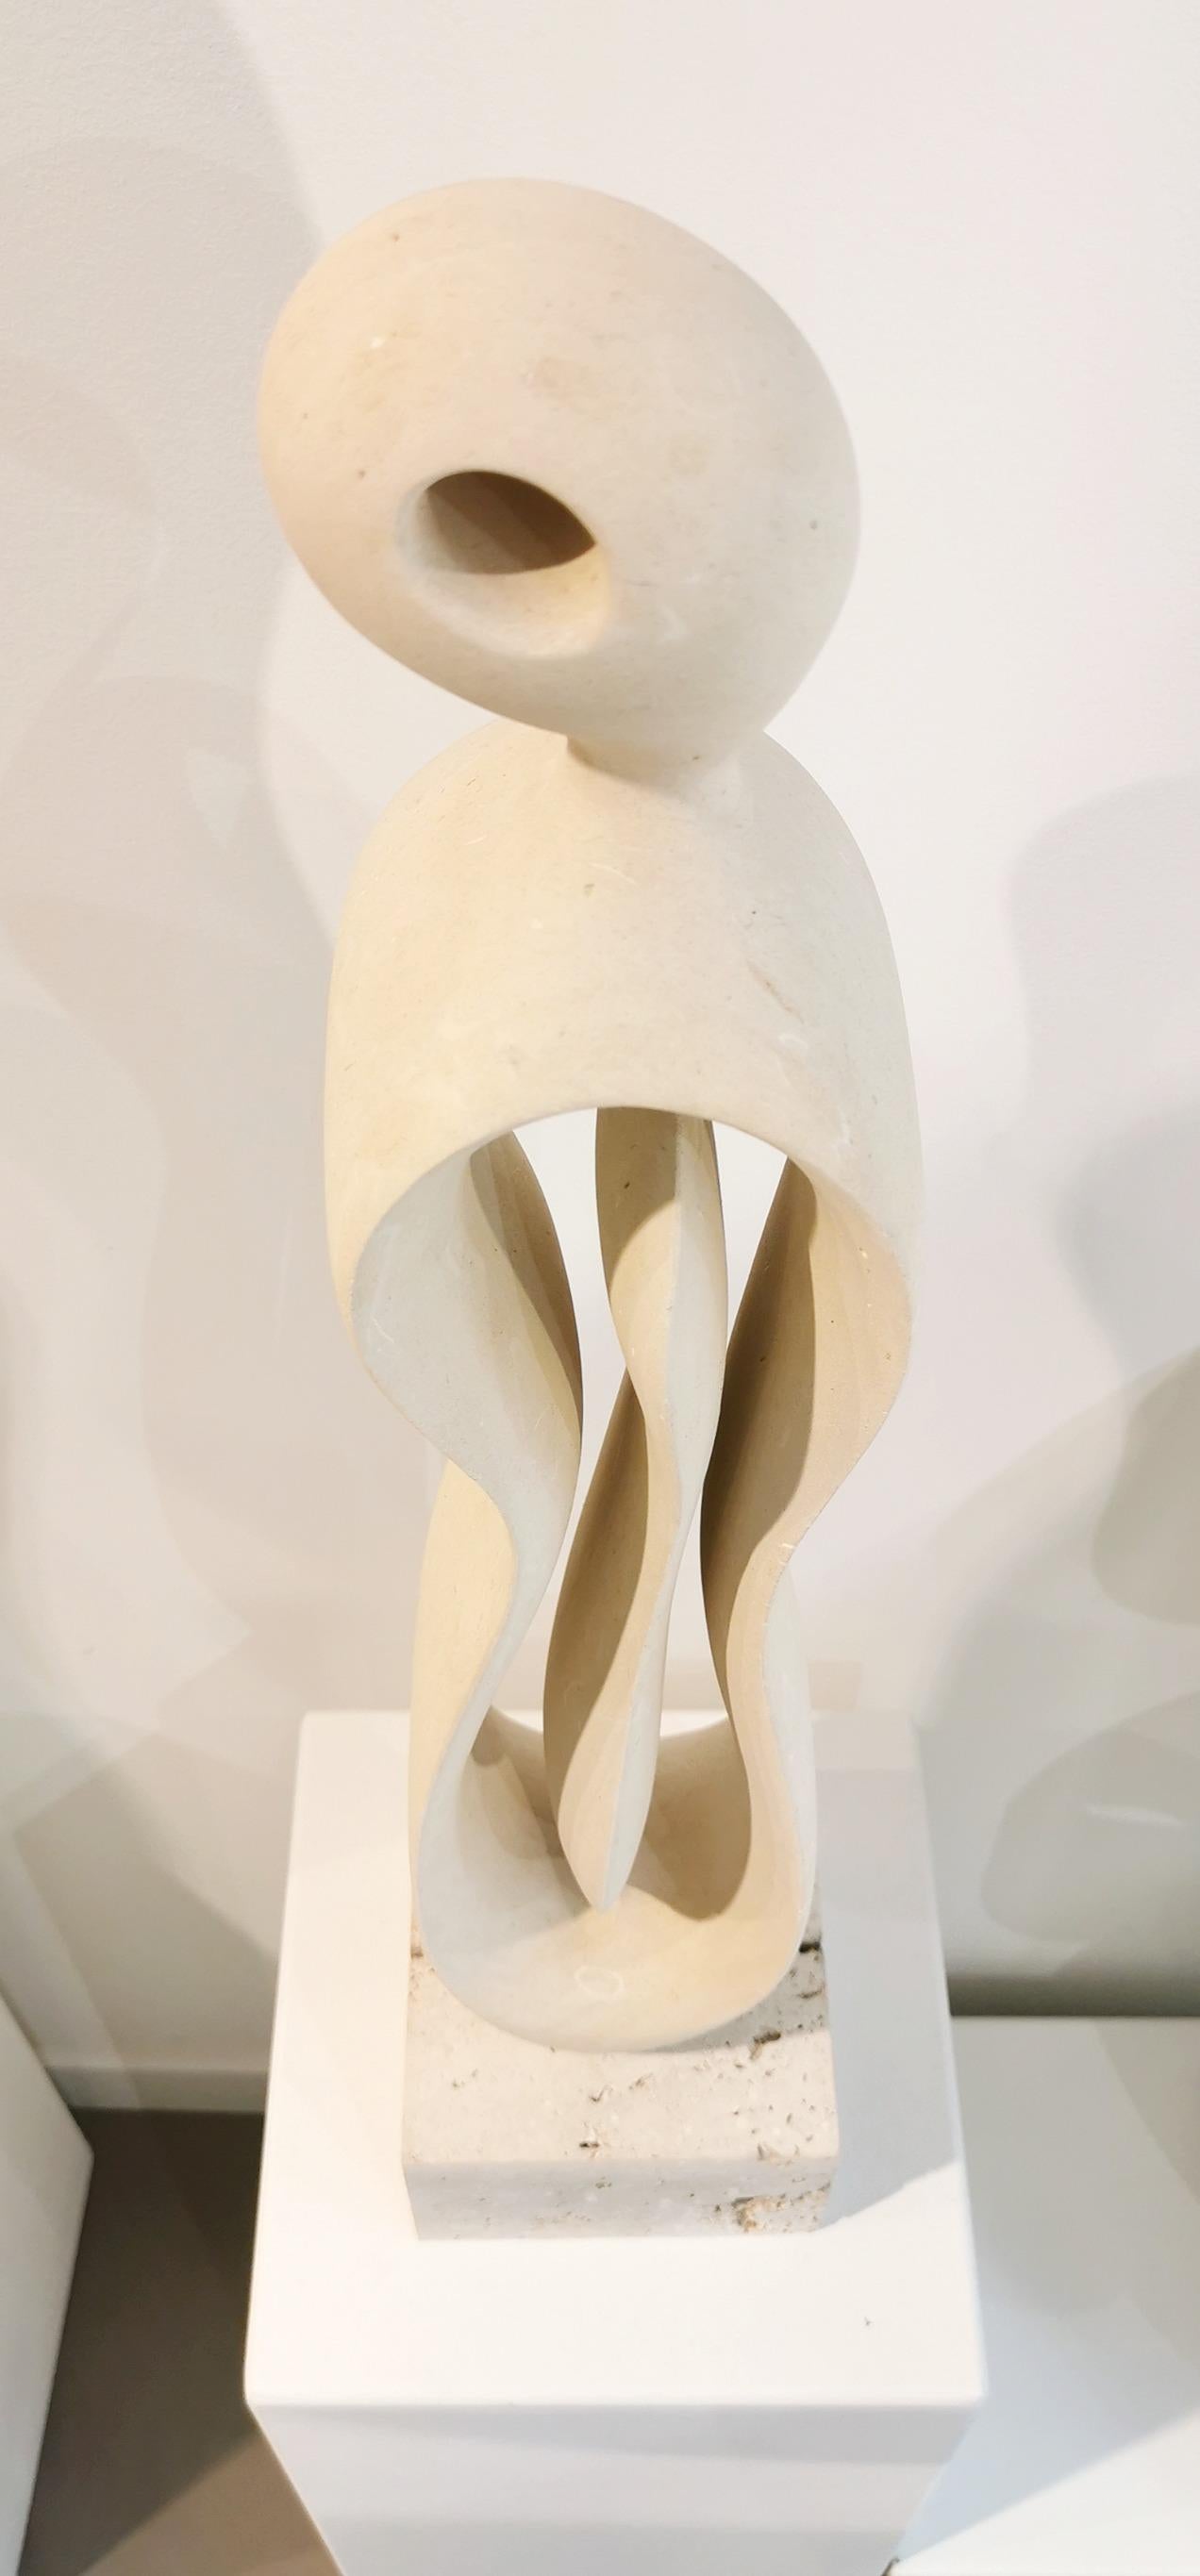 Italian 21st Century Abstract Sculpture MATER 60 cm height by Renzo Buttazzo For Sale